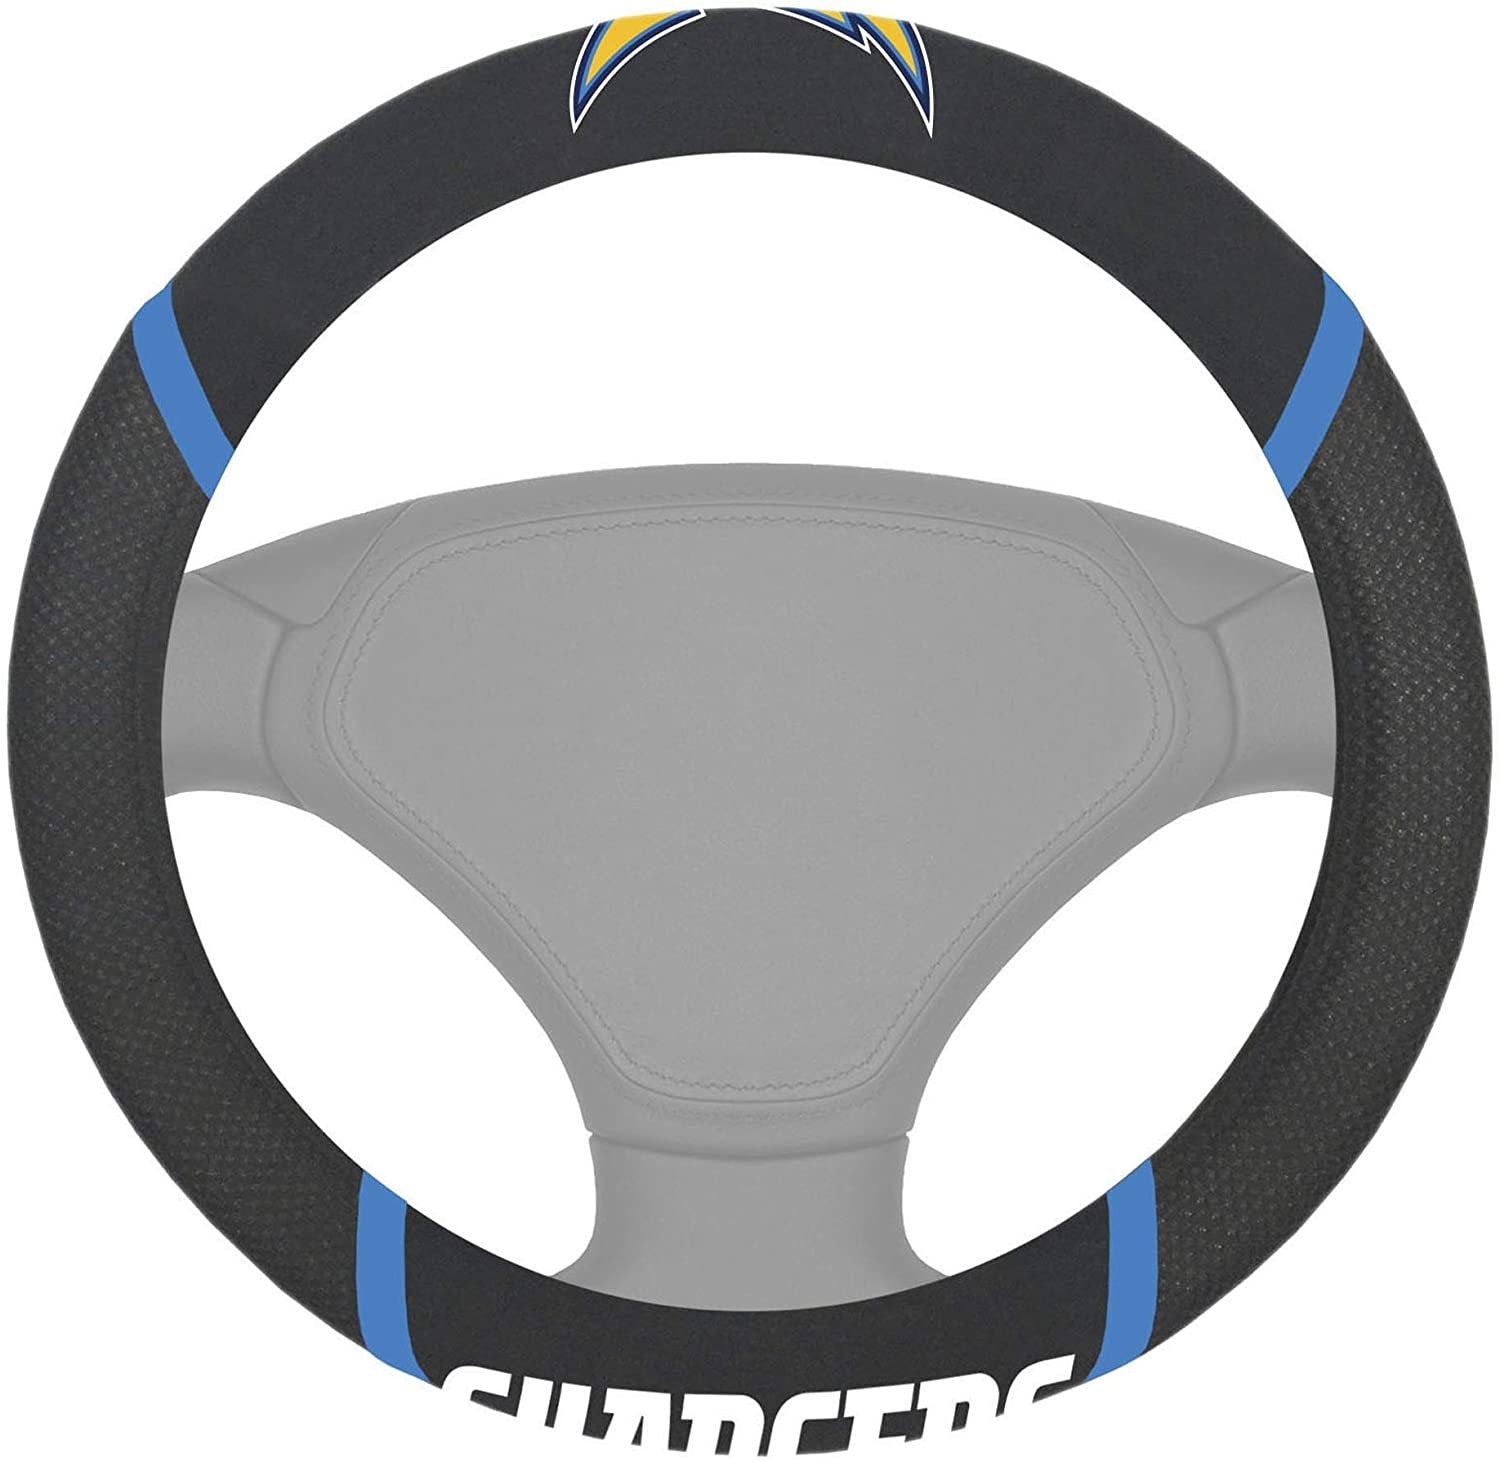 Los Angeles Chargers Steering Wheel Cover Premium Embroidered Black 15 Inch